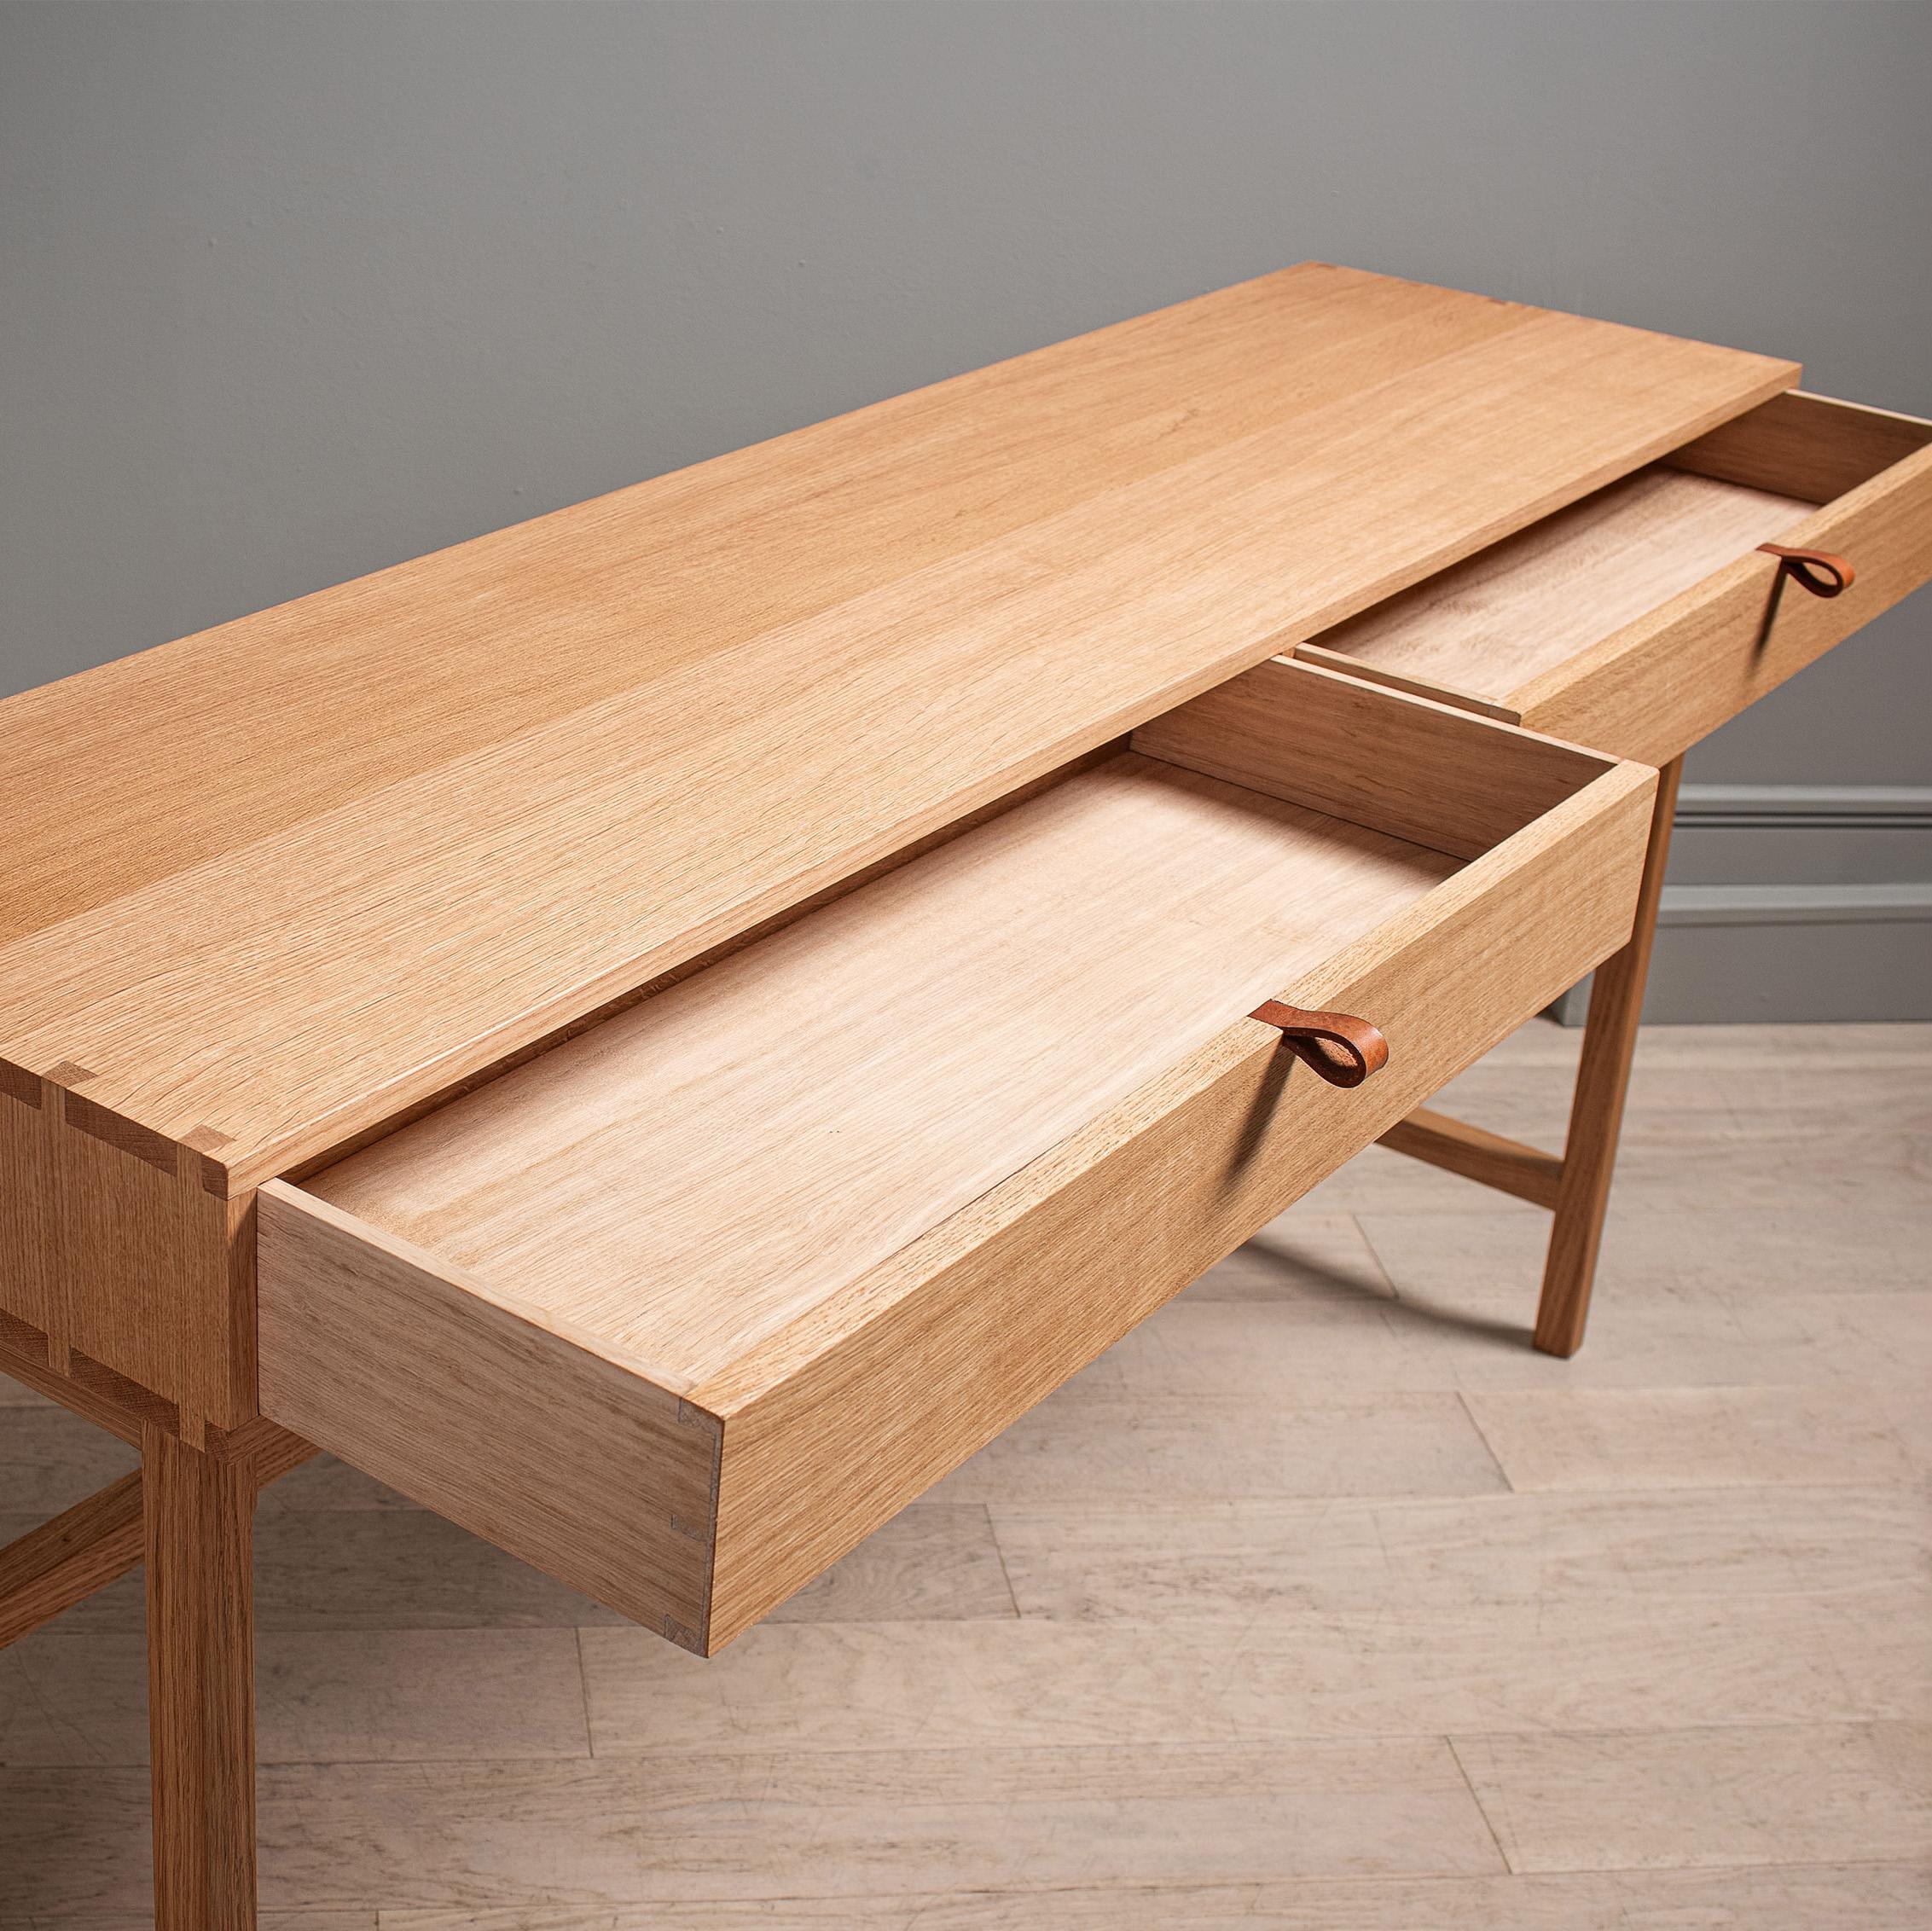 A new large freestanding incarnation of our modernist handcrafted English oak console table. Designed and handmade in England using skilled traditional furniture making techniques. Completely handcrafted from the finest fully quarter-sawn English